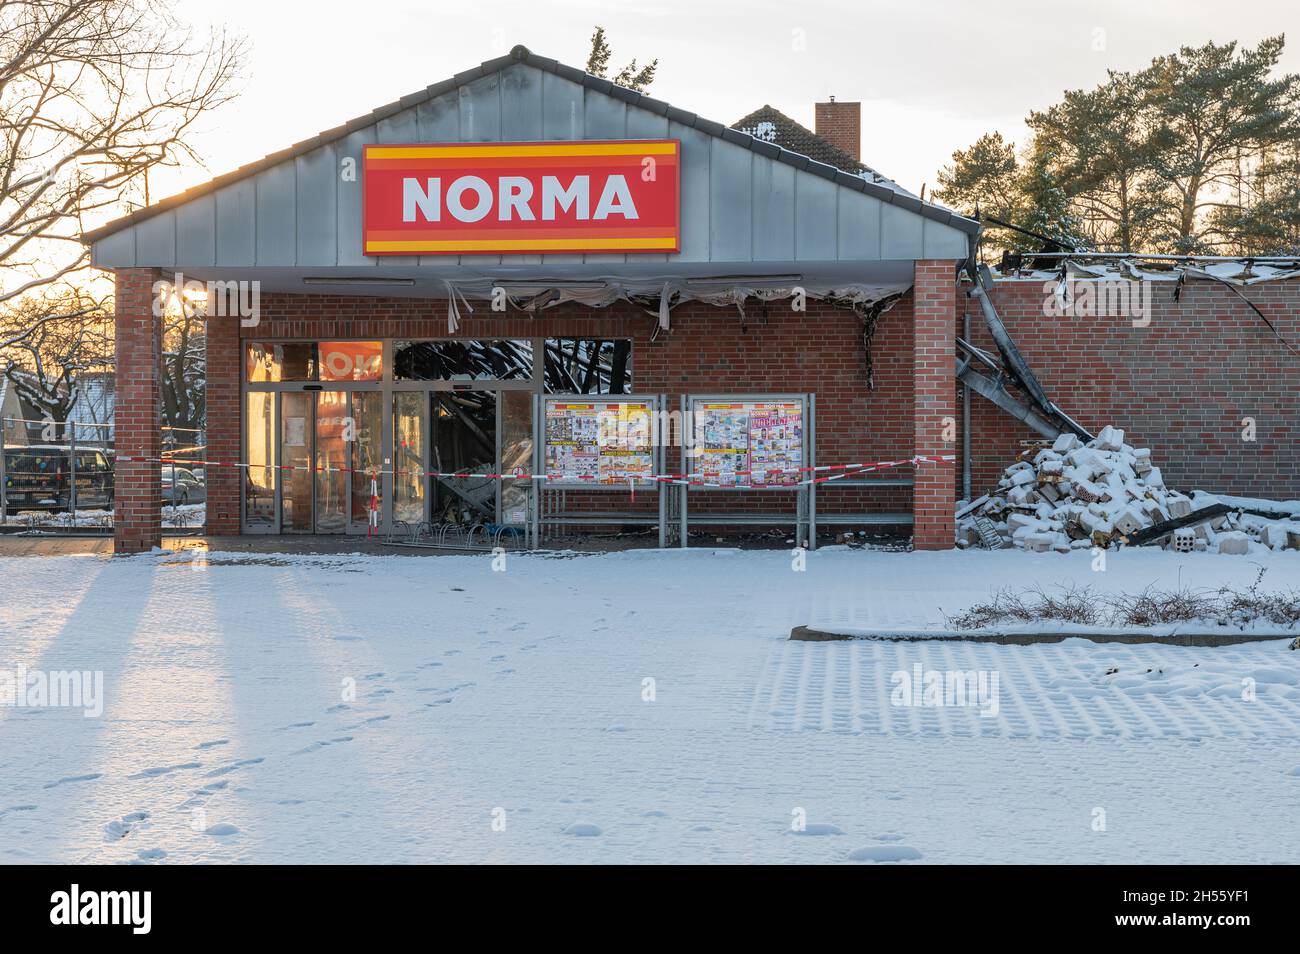 Norma Discounter, which burned down on New Year's Eve due to storage of fireworks Stock Photo